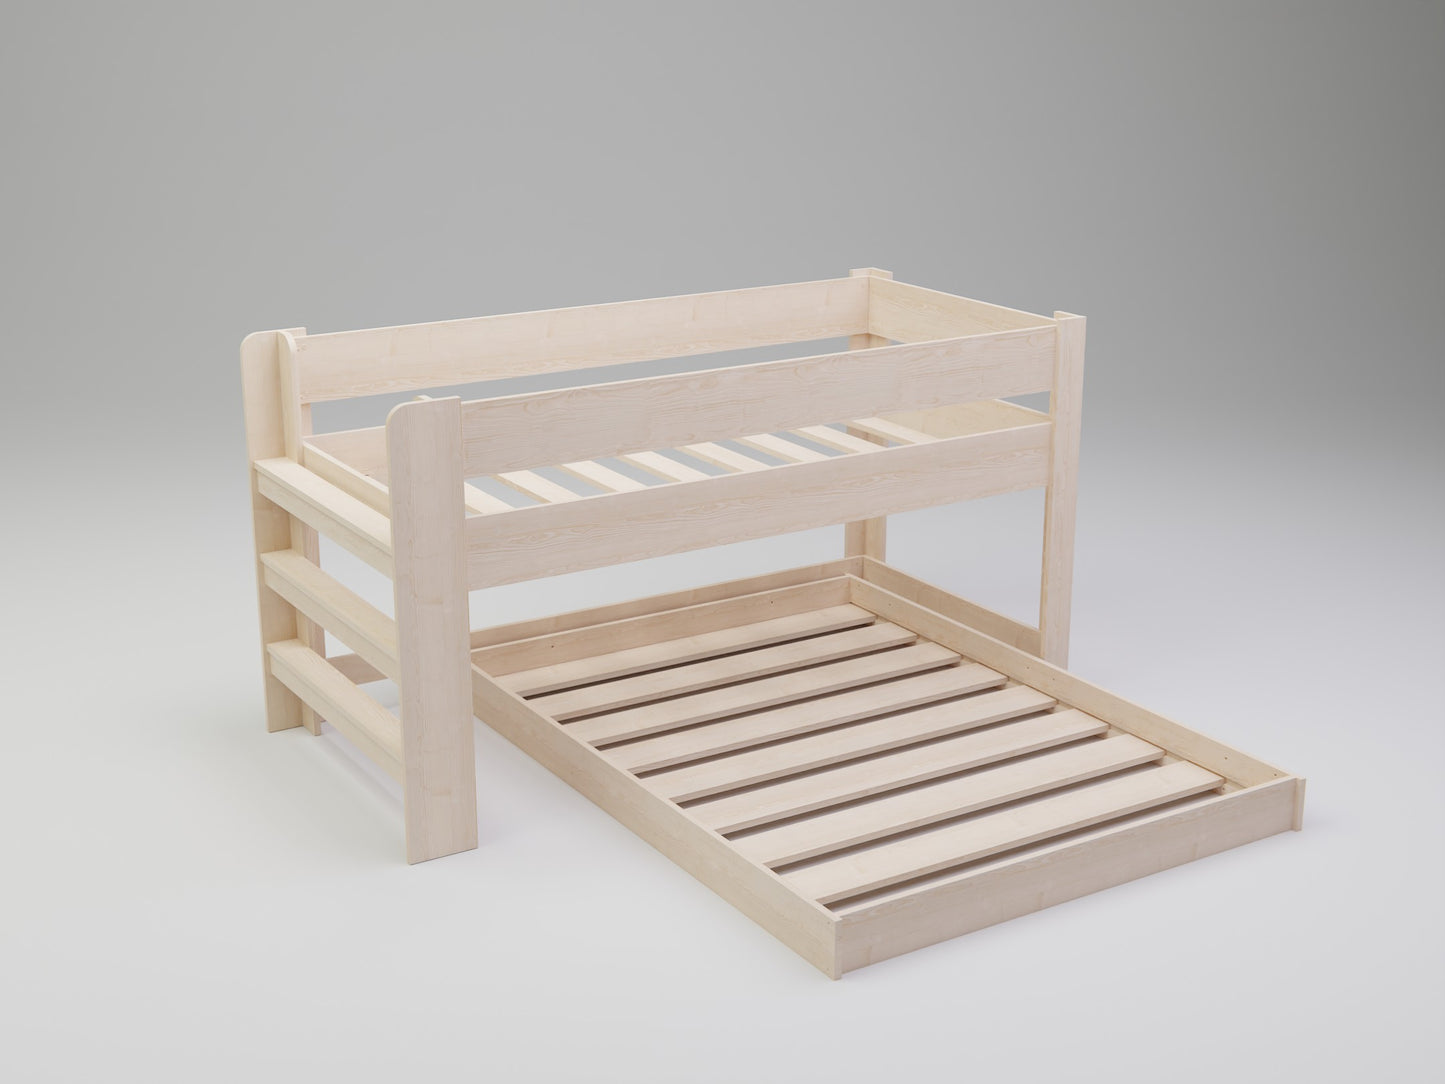 Elegance, quality, and a design made for sharing: Discover the L shaped bed perfect for siblings.